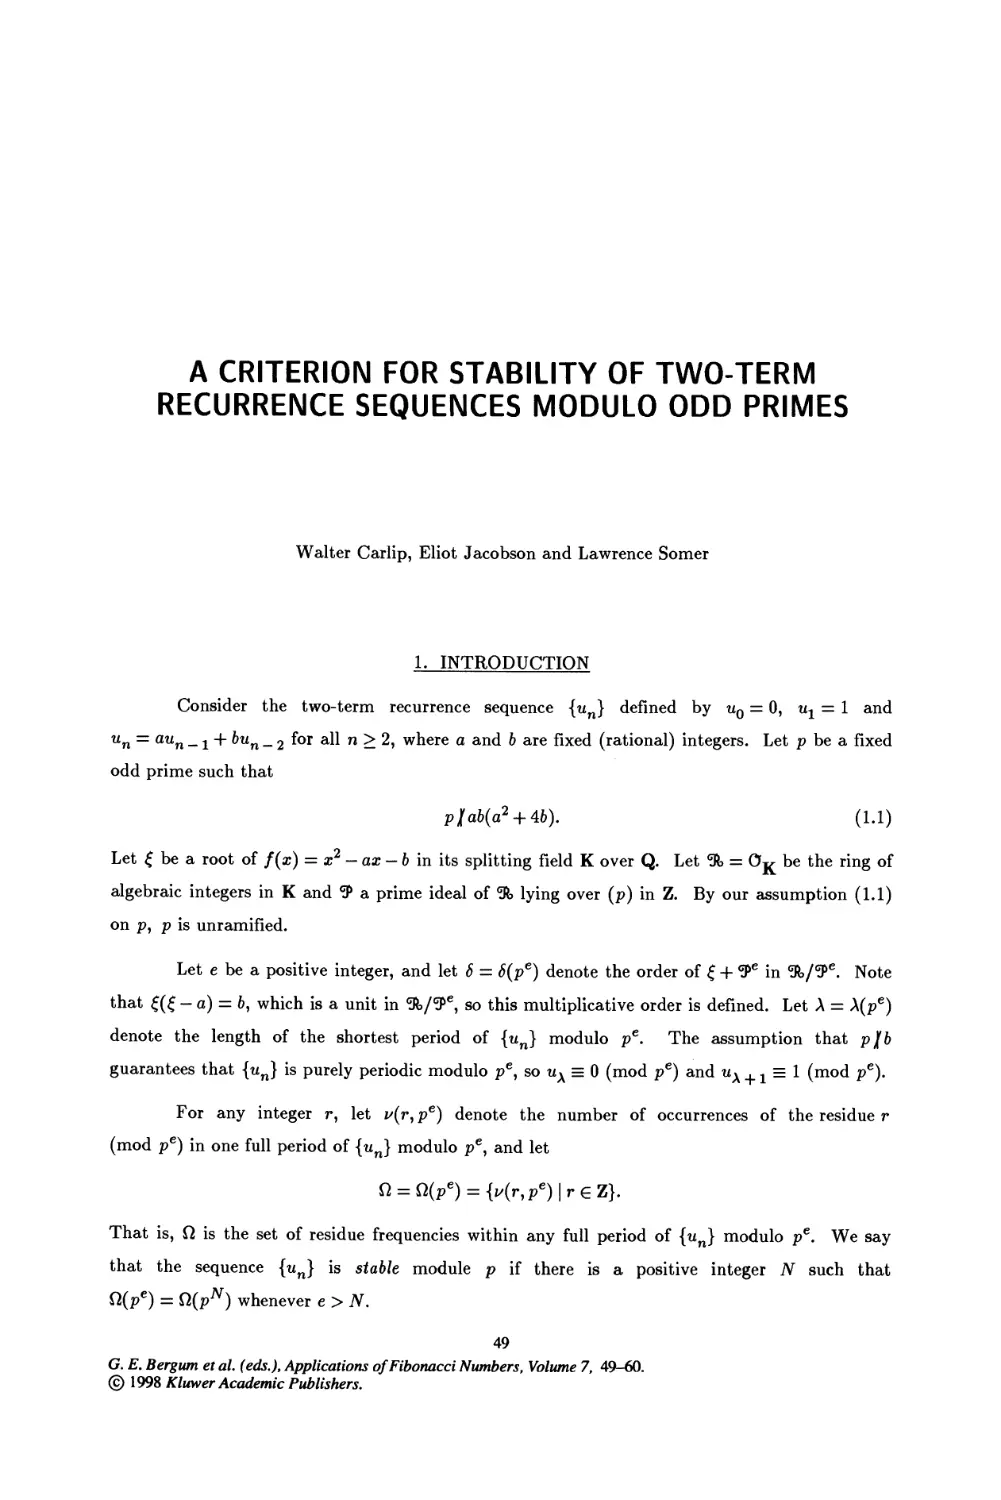 8. A Criterion For Stability of Two-Term Recurrence Sequences Modulo Odd Primes